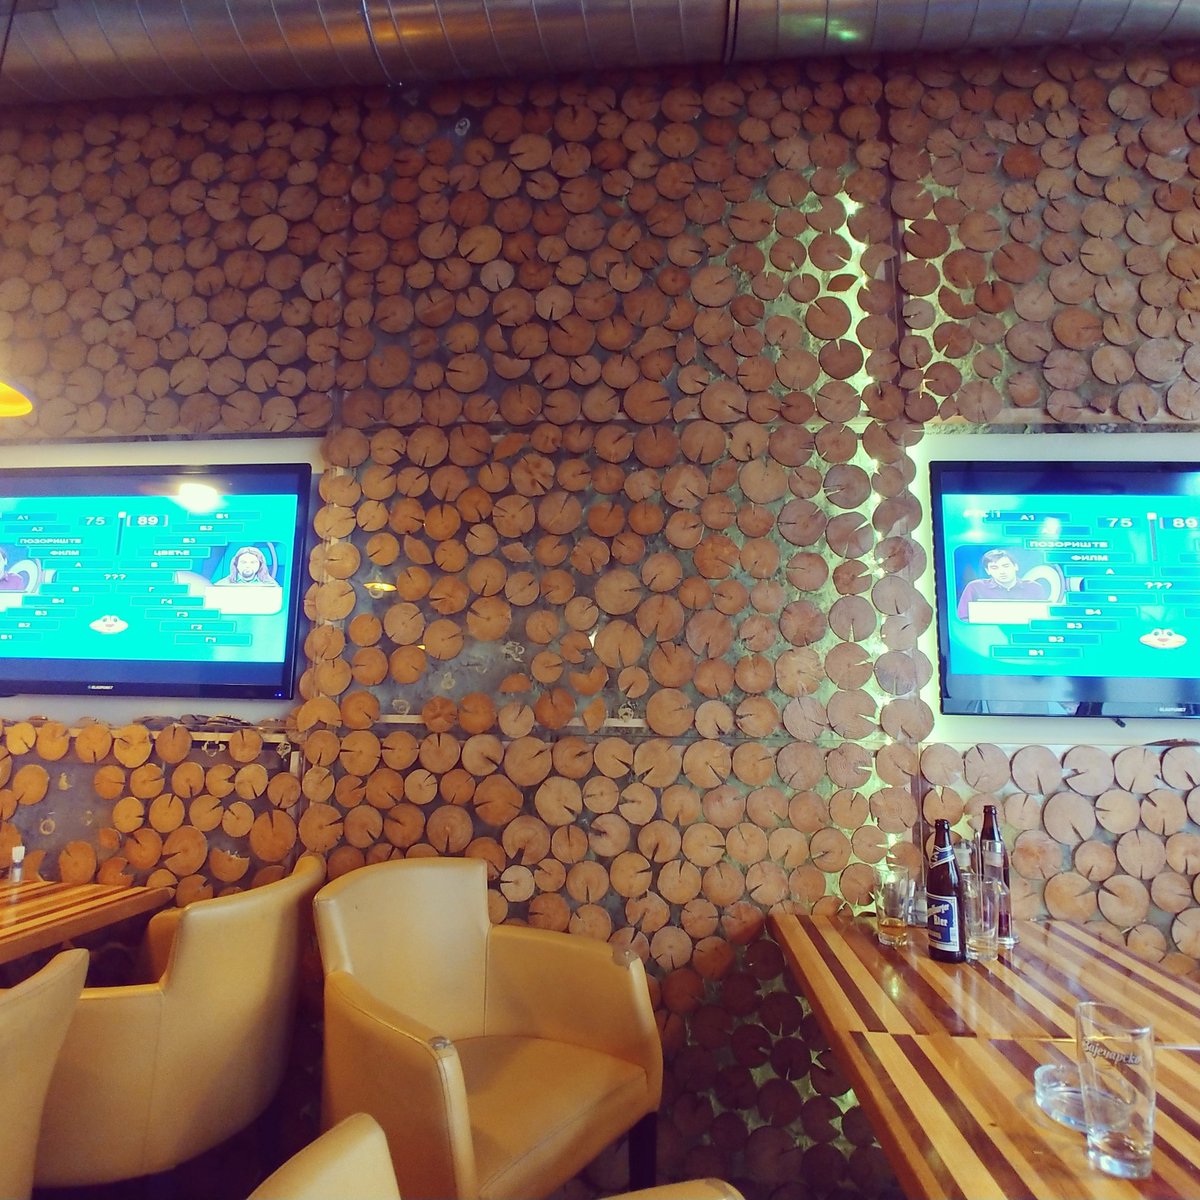 A #serbian restaurant wall in #vienna #austria . Tree cookies fixed to acrylic backlit by leds. Great food too! #doitwise
#moderndesign 
#moderndesignfurniture 
#customwoodworking 
#customcreatioms
#woodworking  #wood #woodshop #craftsman #powertools #makers #makersmovement